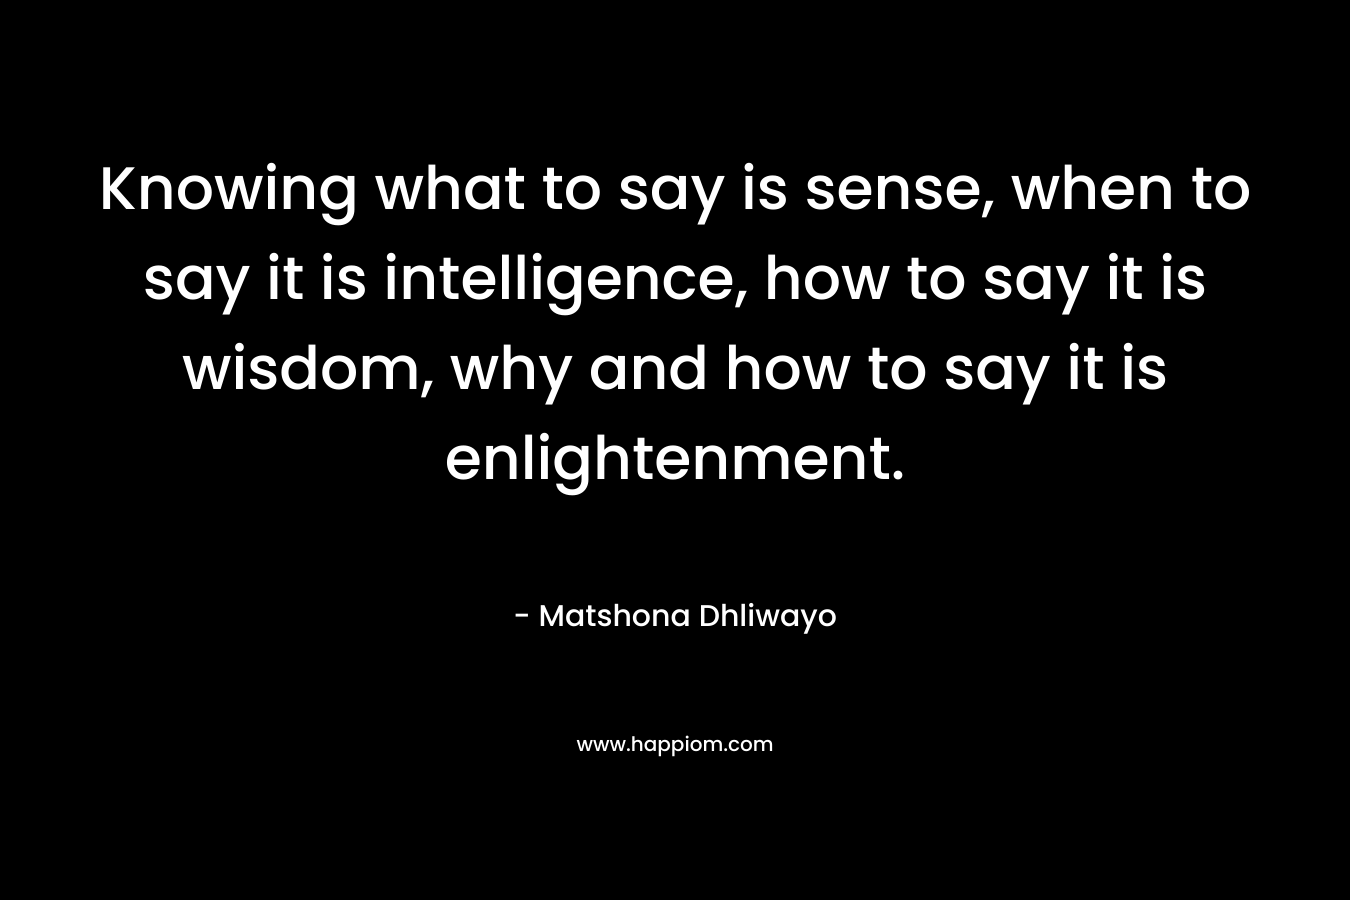 Knowing what to say is sense, when to say it is intelligence, how to say it is wisdom, why and how to say it is enlightenment.